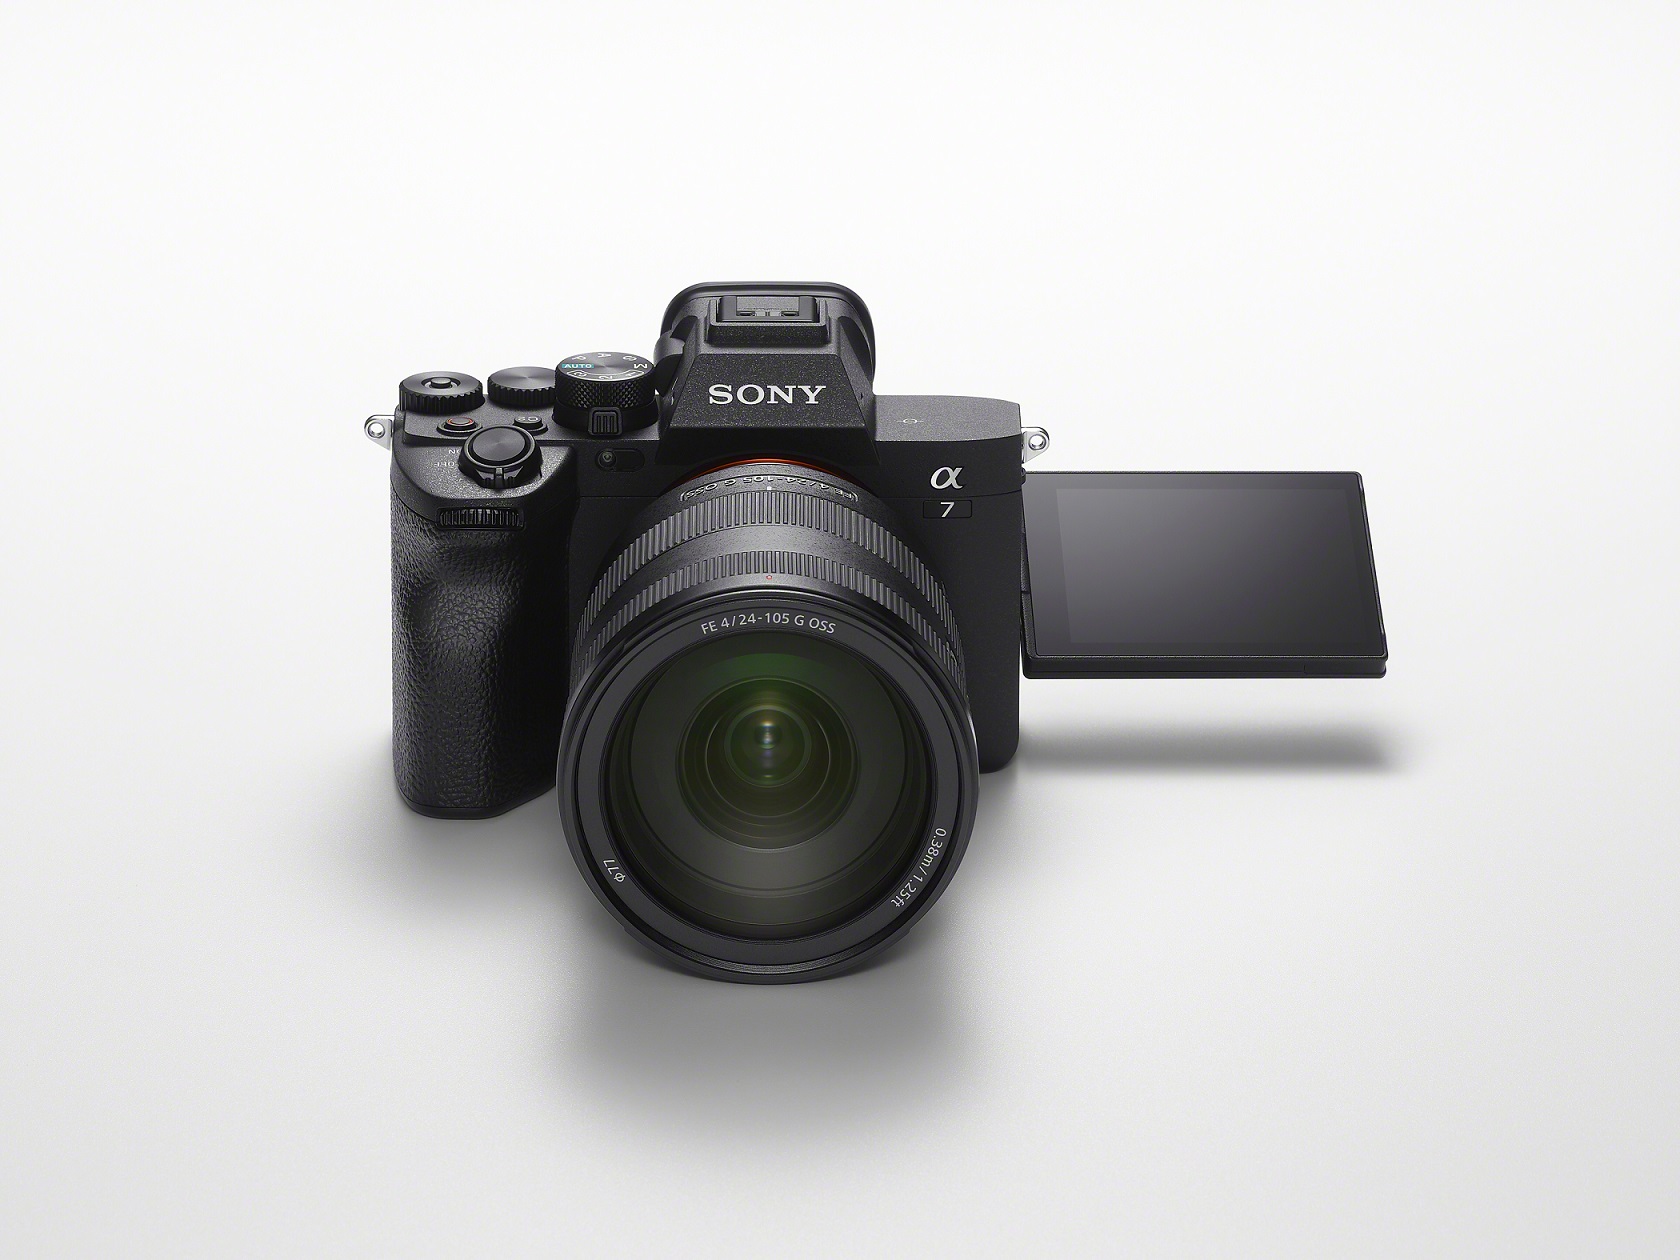 Sony’s Alpha 7 IV goes beyond ‘Basic’ with 33-Megapixel full-frame image sensor and outstanding photo and video operability